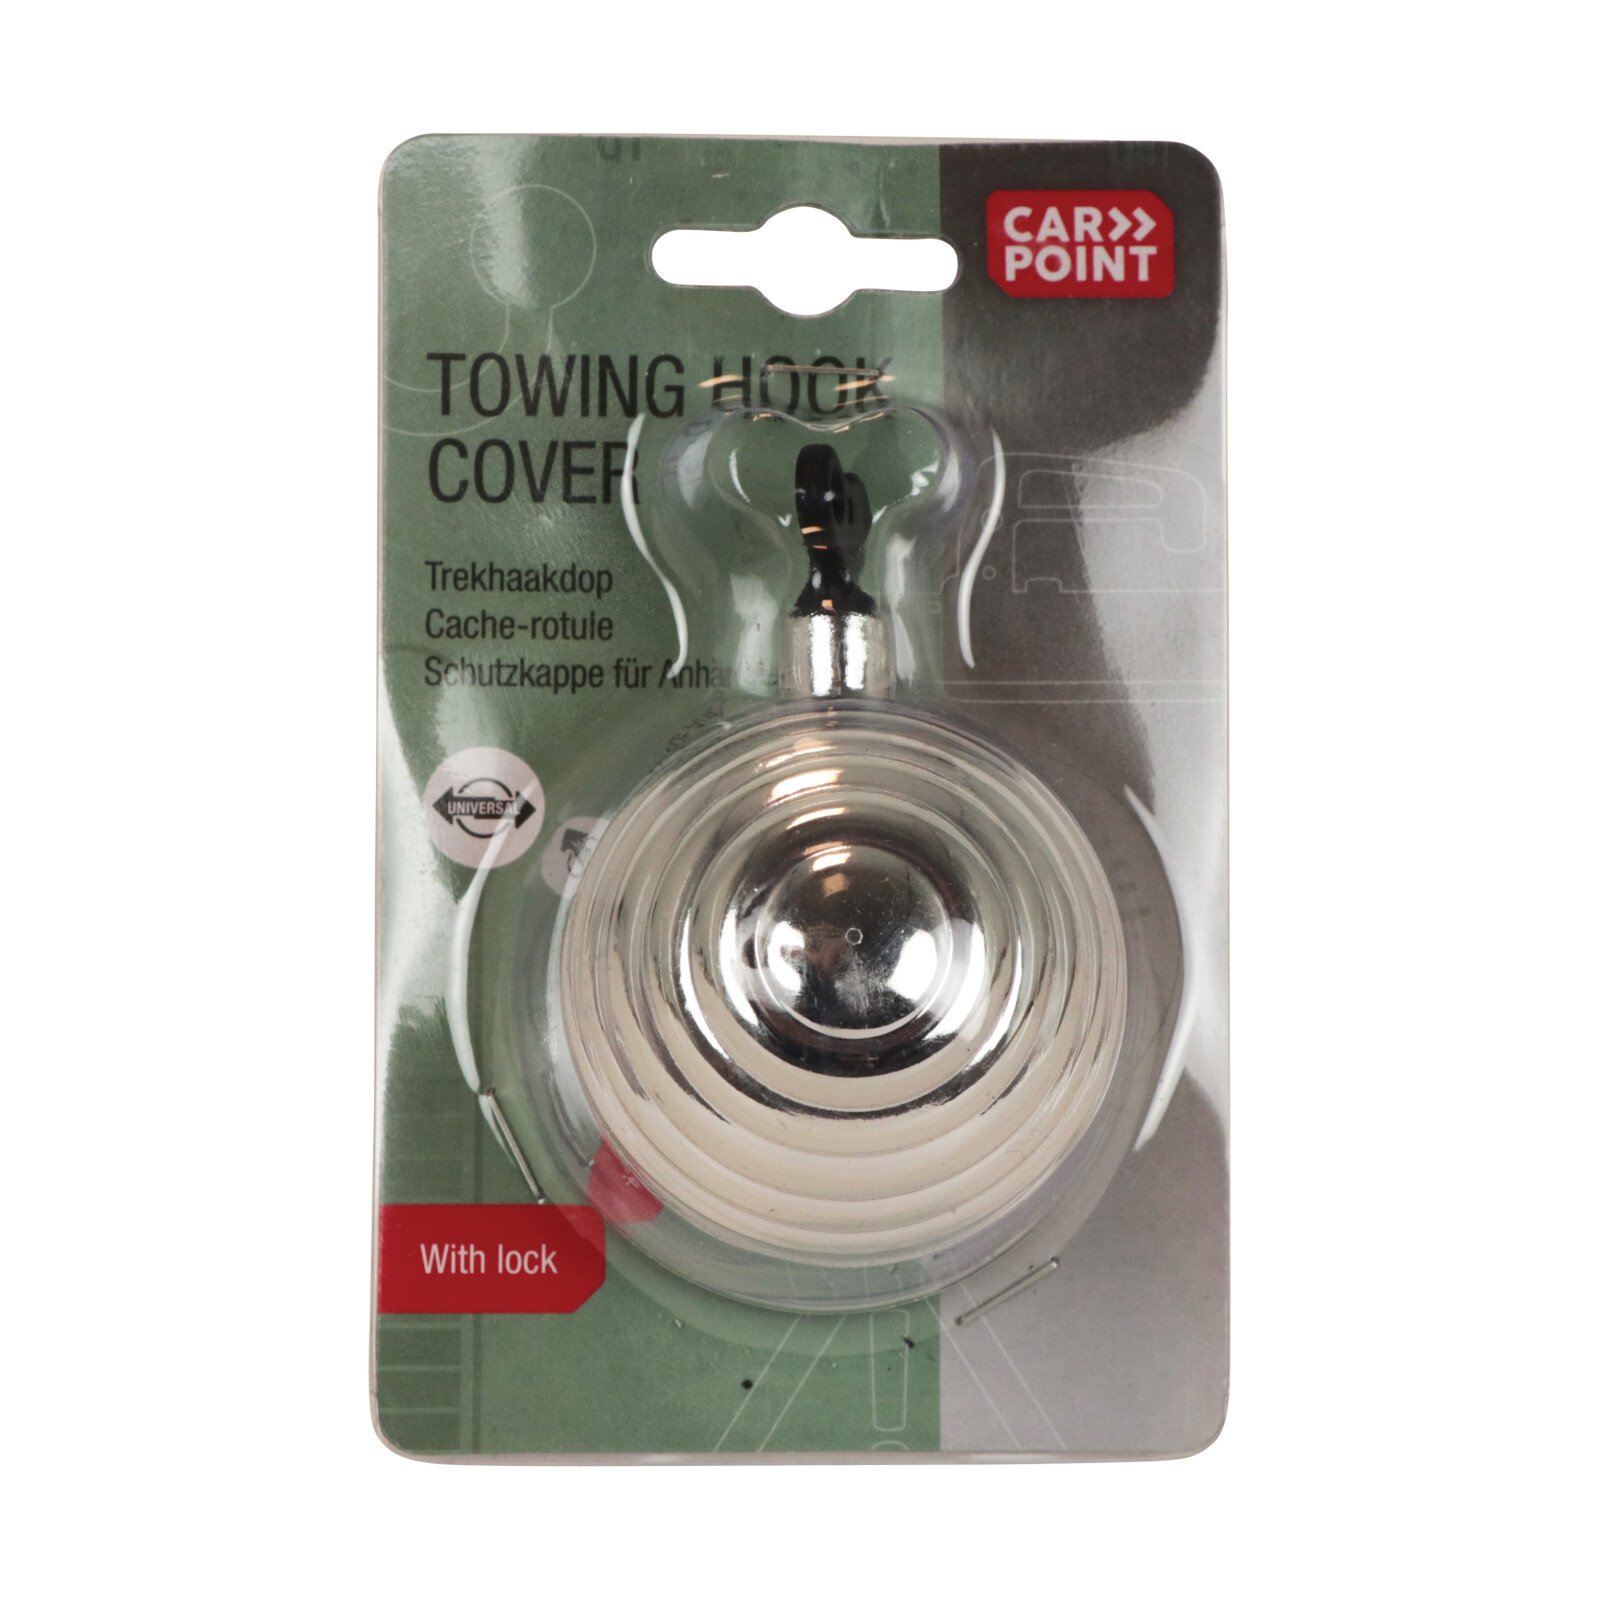 Carpoint towing hook cover with lock - Chrome thumb